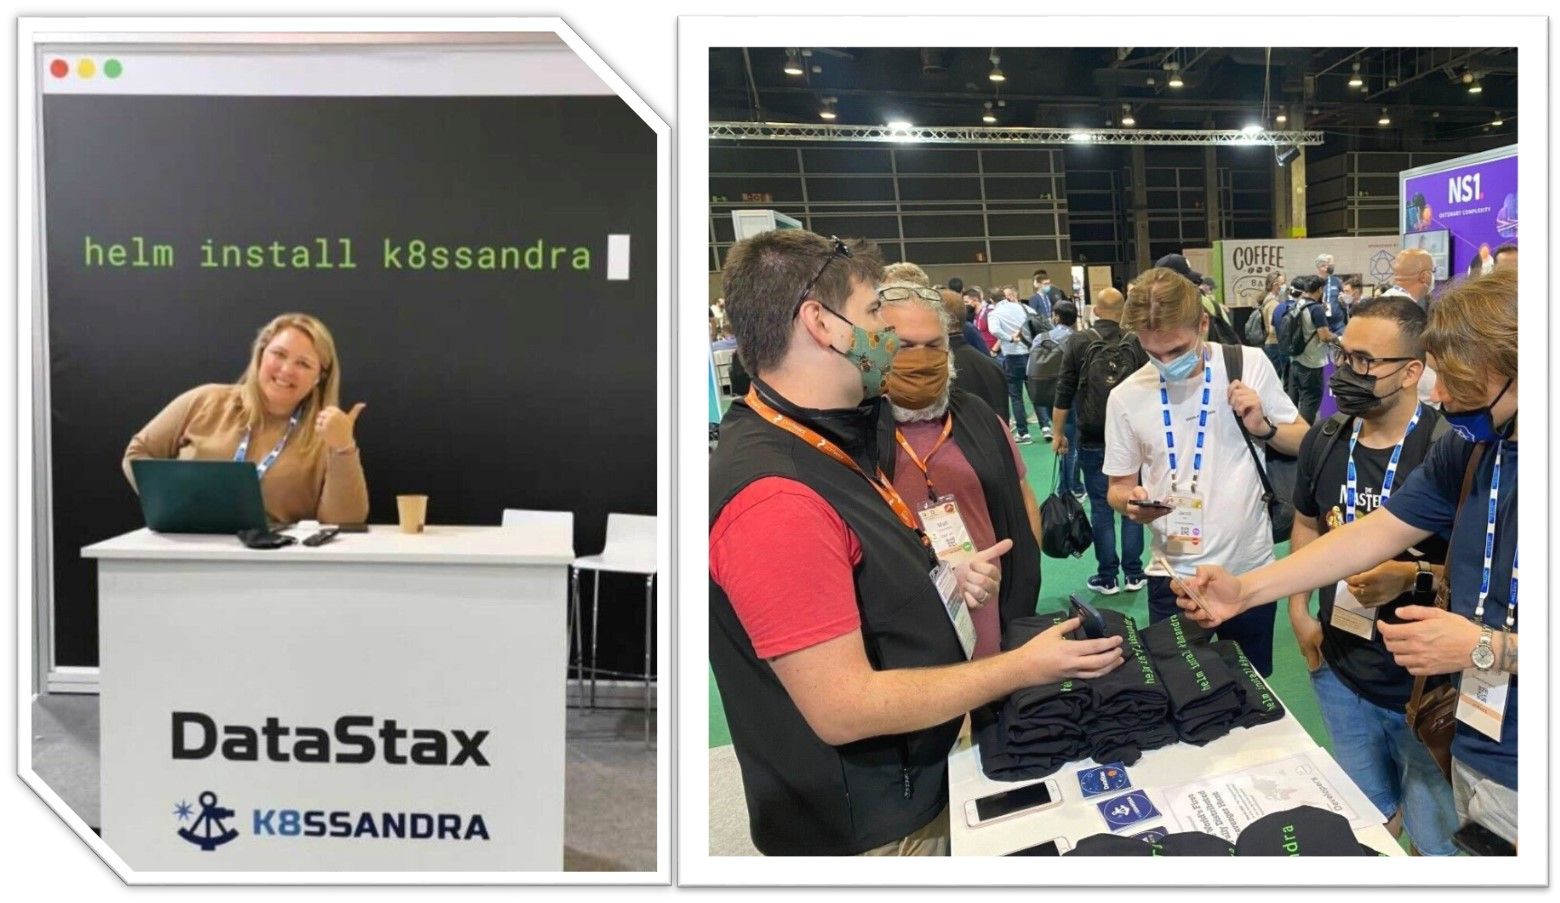 Images of DataStax booth at KubeCon 22 Europe and developers discussing their projects with DataStax engineers